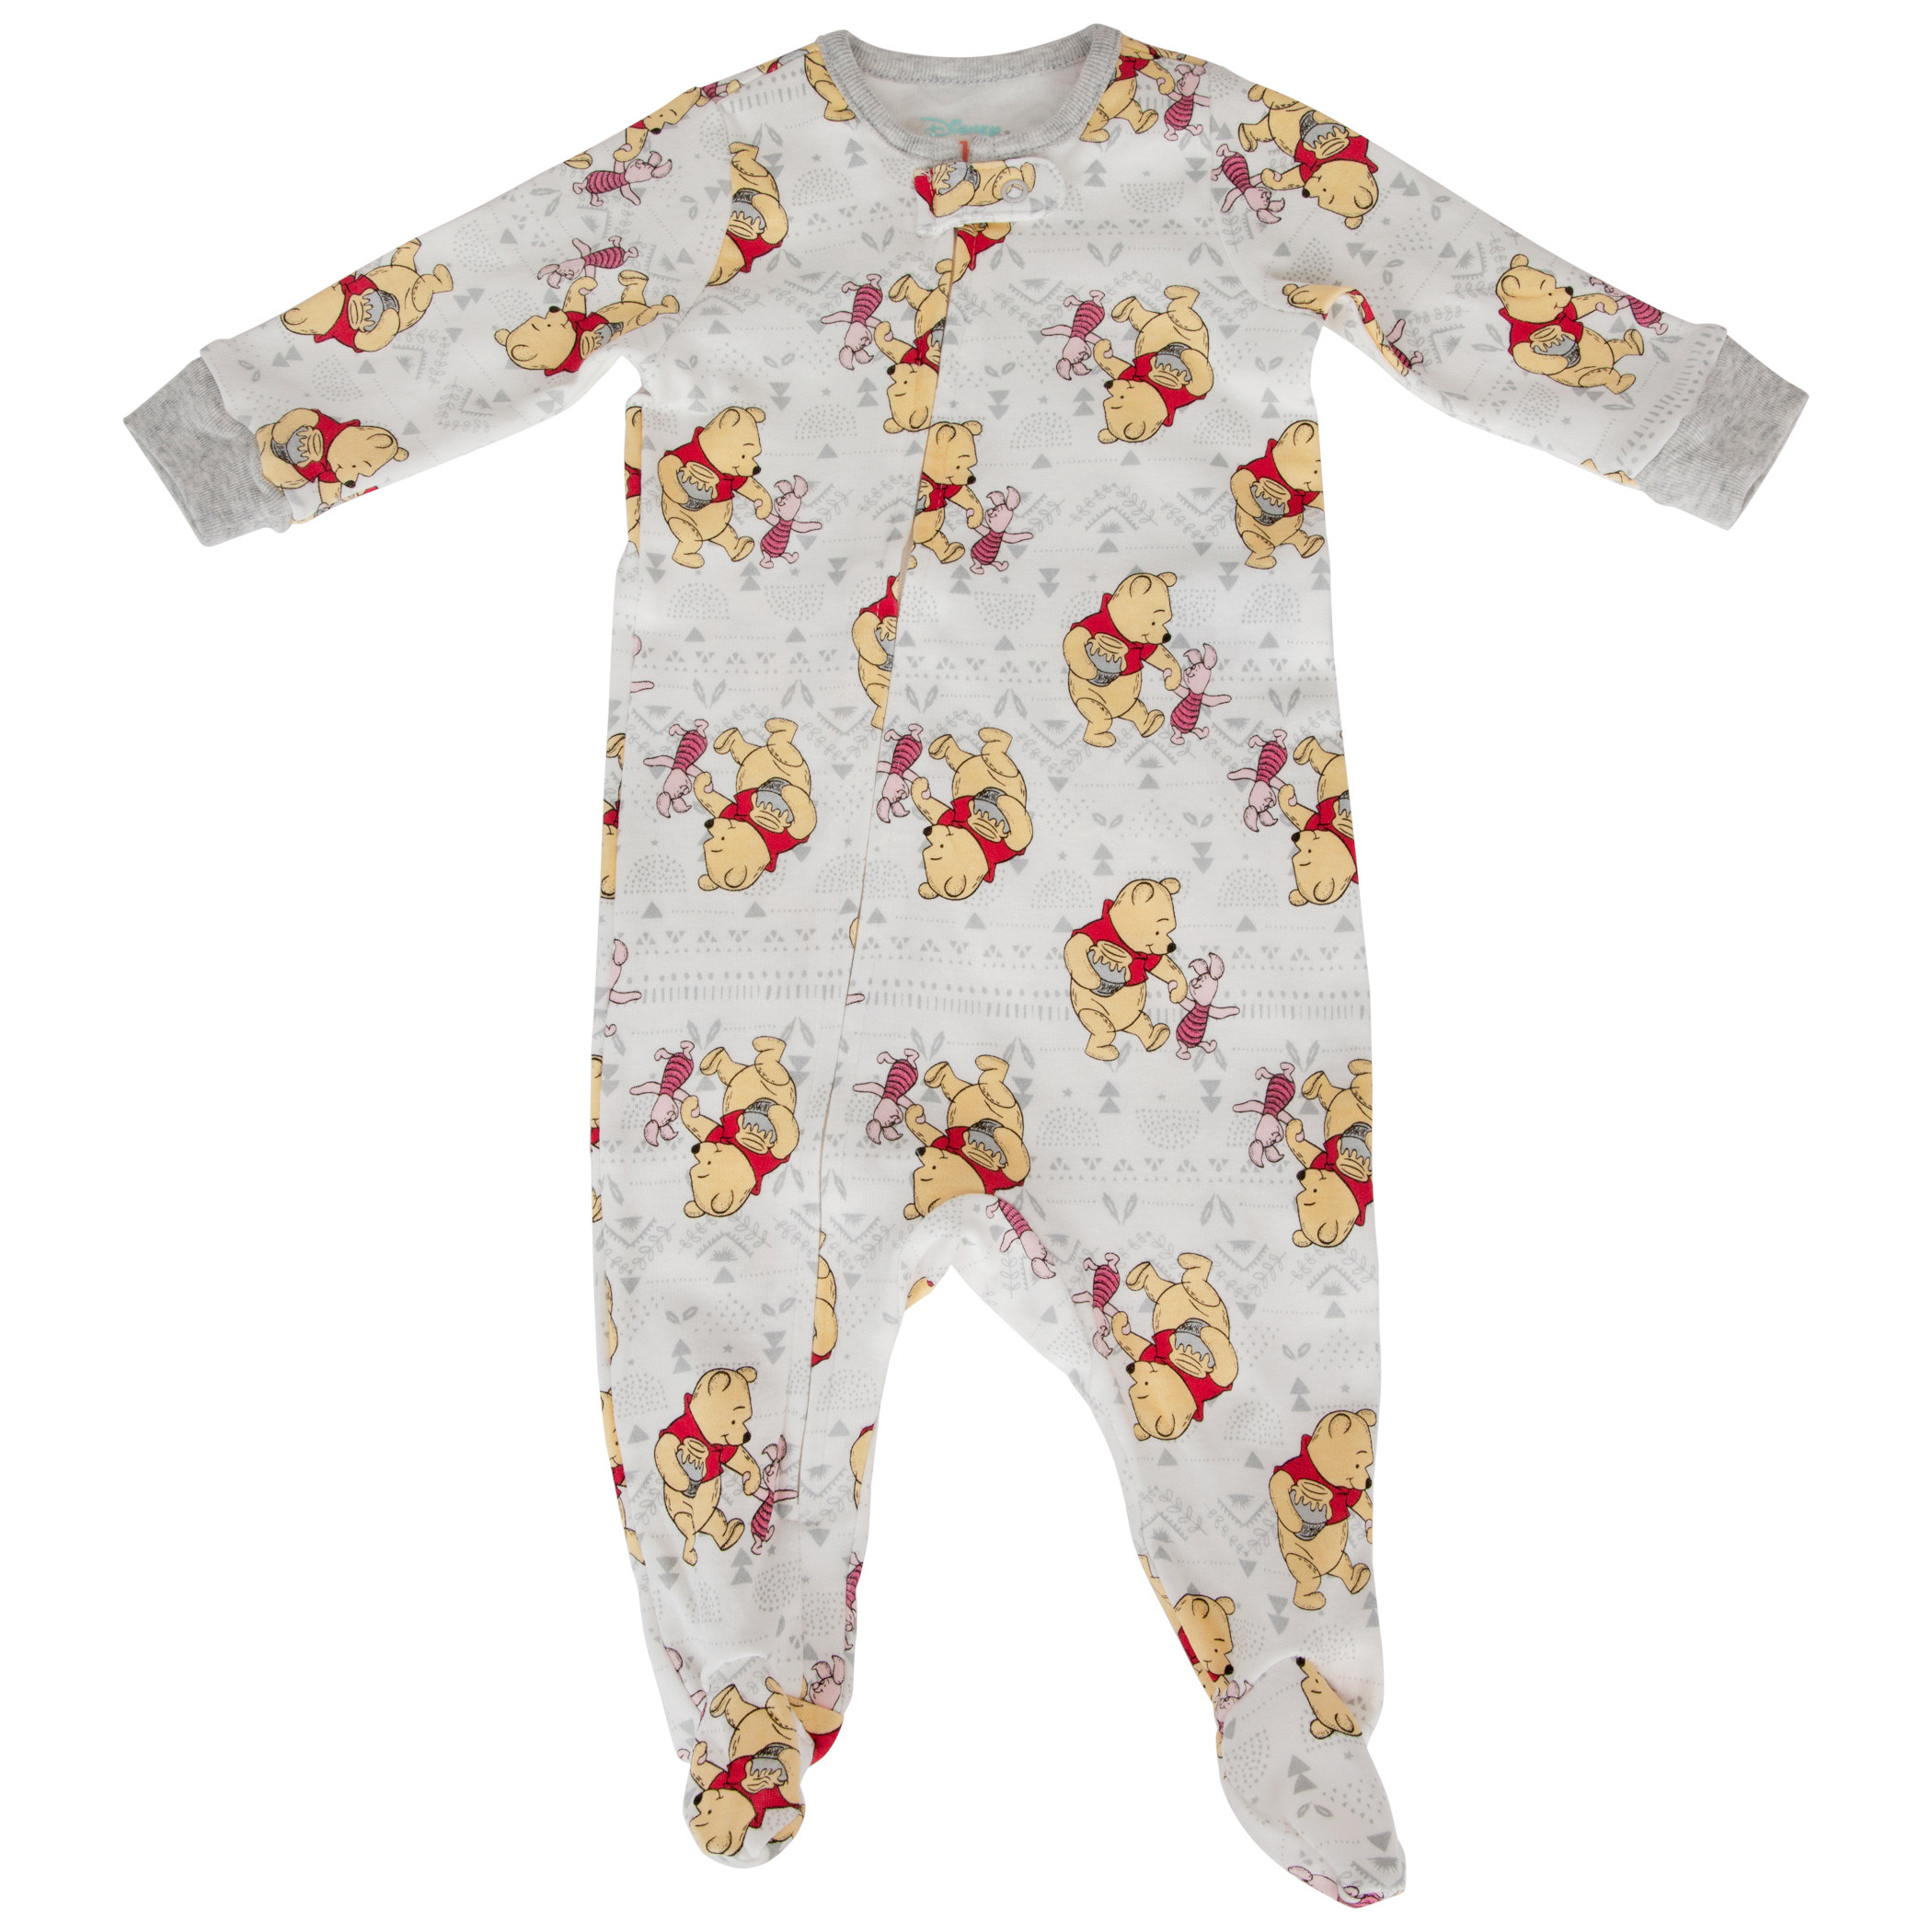 Winnie The Pooh and Piglet All Over Infant Sleeper